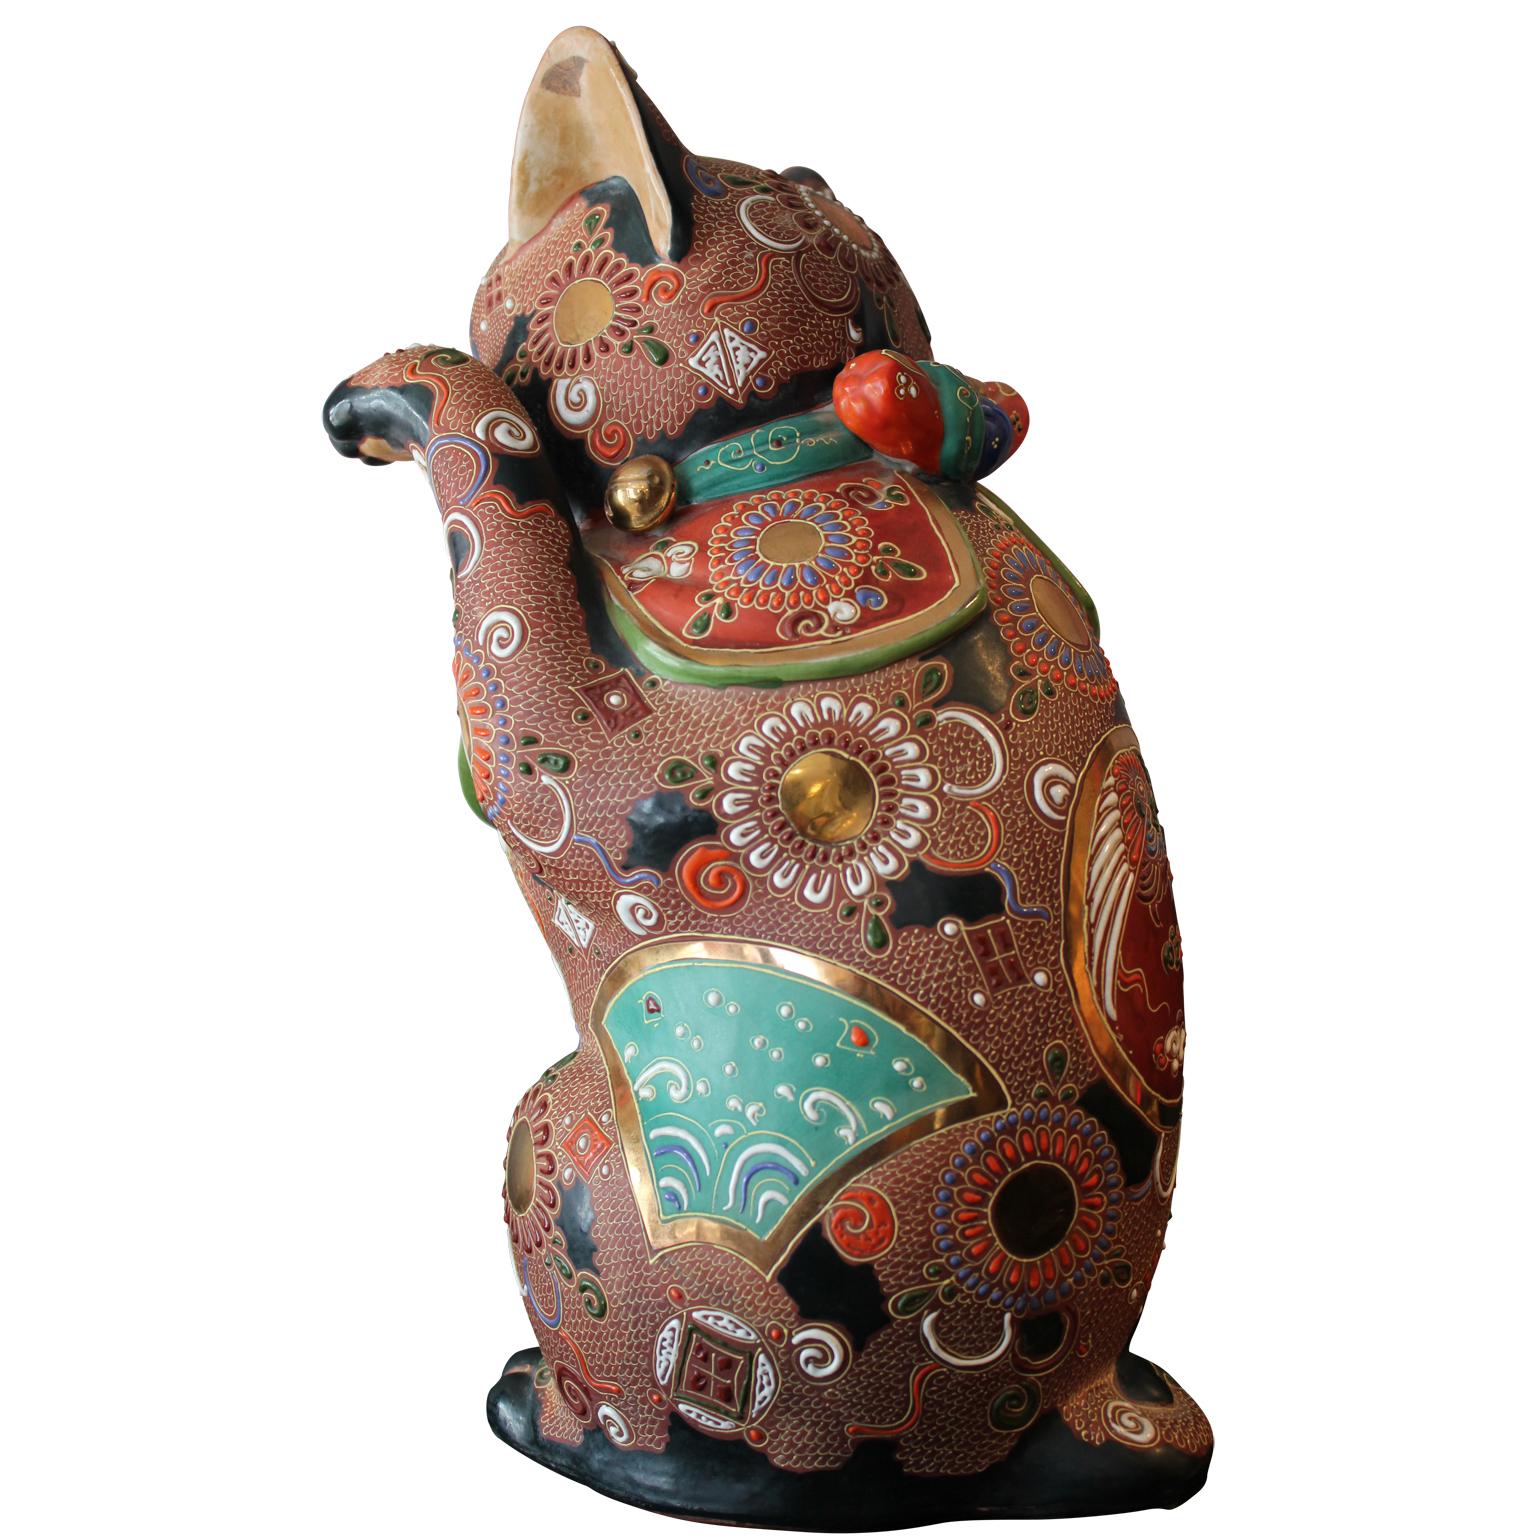 Ornate porcelain Maneki Neko or popularly known as Lucky Cat. The beckoning cat is a sign of wealth in Japanese and Chinses culture. The “mori” style refers to raised loops and other decorative motifs applied by squeezing a tube of slip onto the